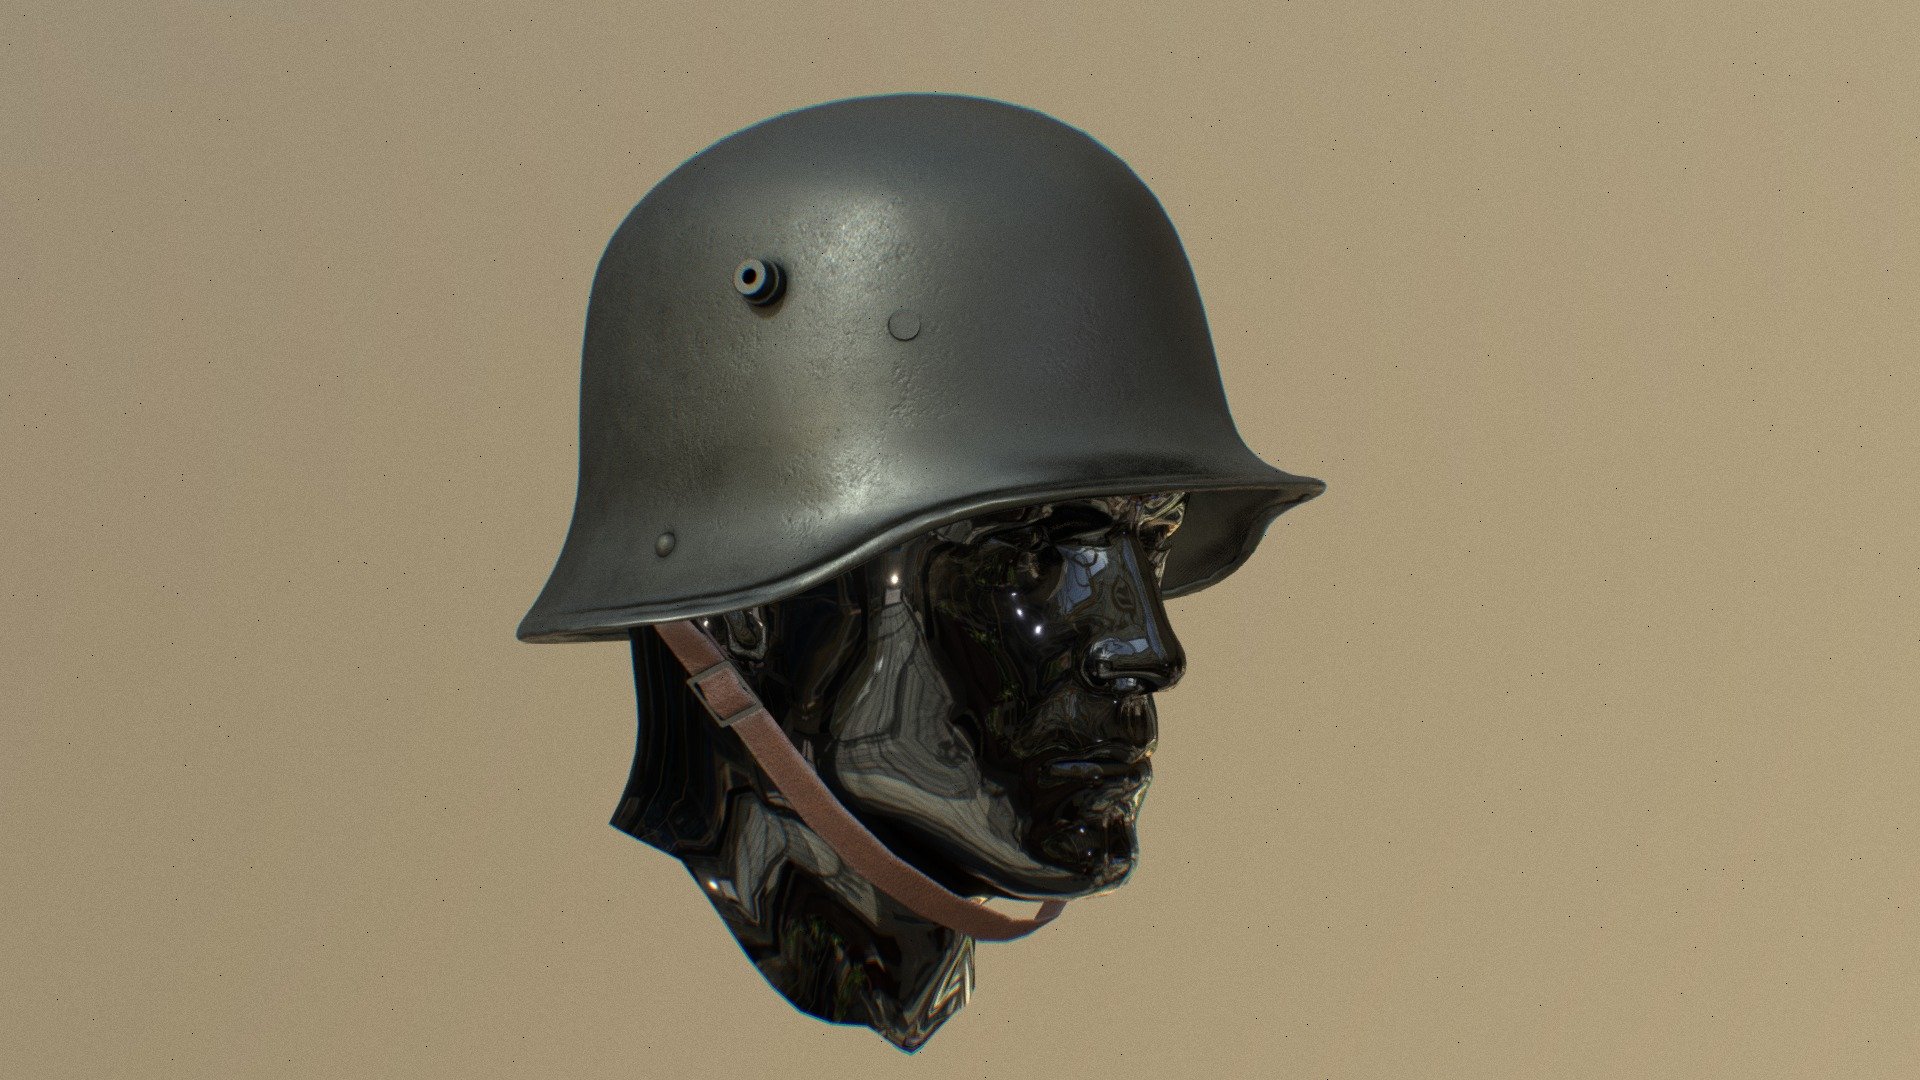 The Stahlhelm (&lsquo;steel helmet') is a German military steel combat helmet intended to provide protection against shrapnels and fragments or shards of grenades. The term Stahlhelm refers both to a generic steel helmet and more specifically to the distinctive German military design.

The armies of major European powers introduced helmets of this type during World War I. The German Army began to replace the traditional boiled leather Pickelhaube (&lsquo;spiked helmet') with the Stahlhelm in 1916. The Stahlhelm, with its distinctive &ldquo;coal scuttle